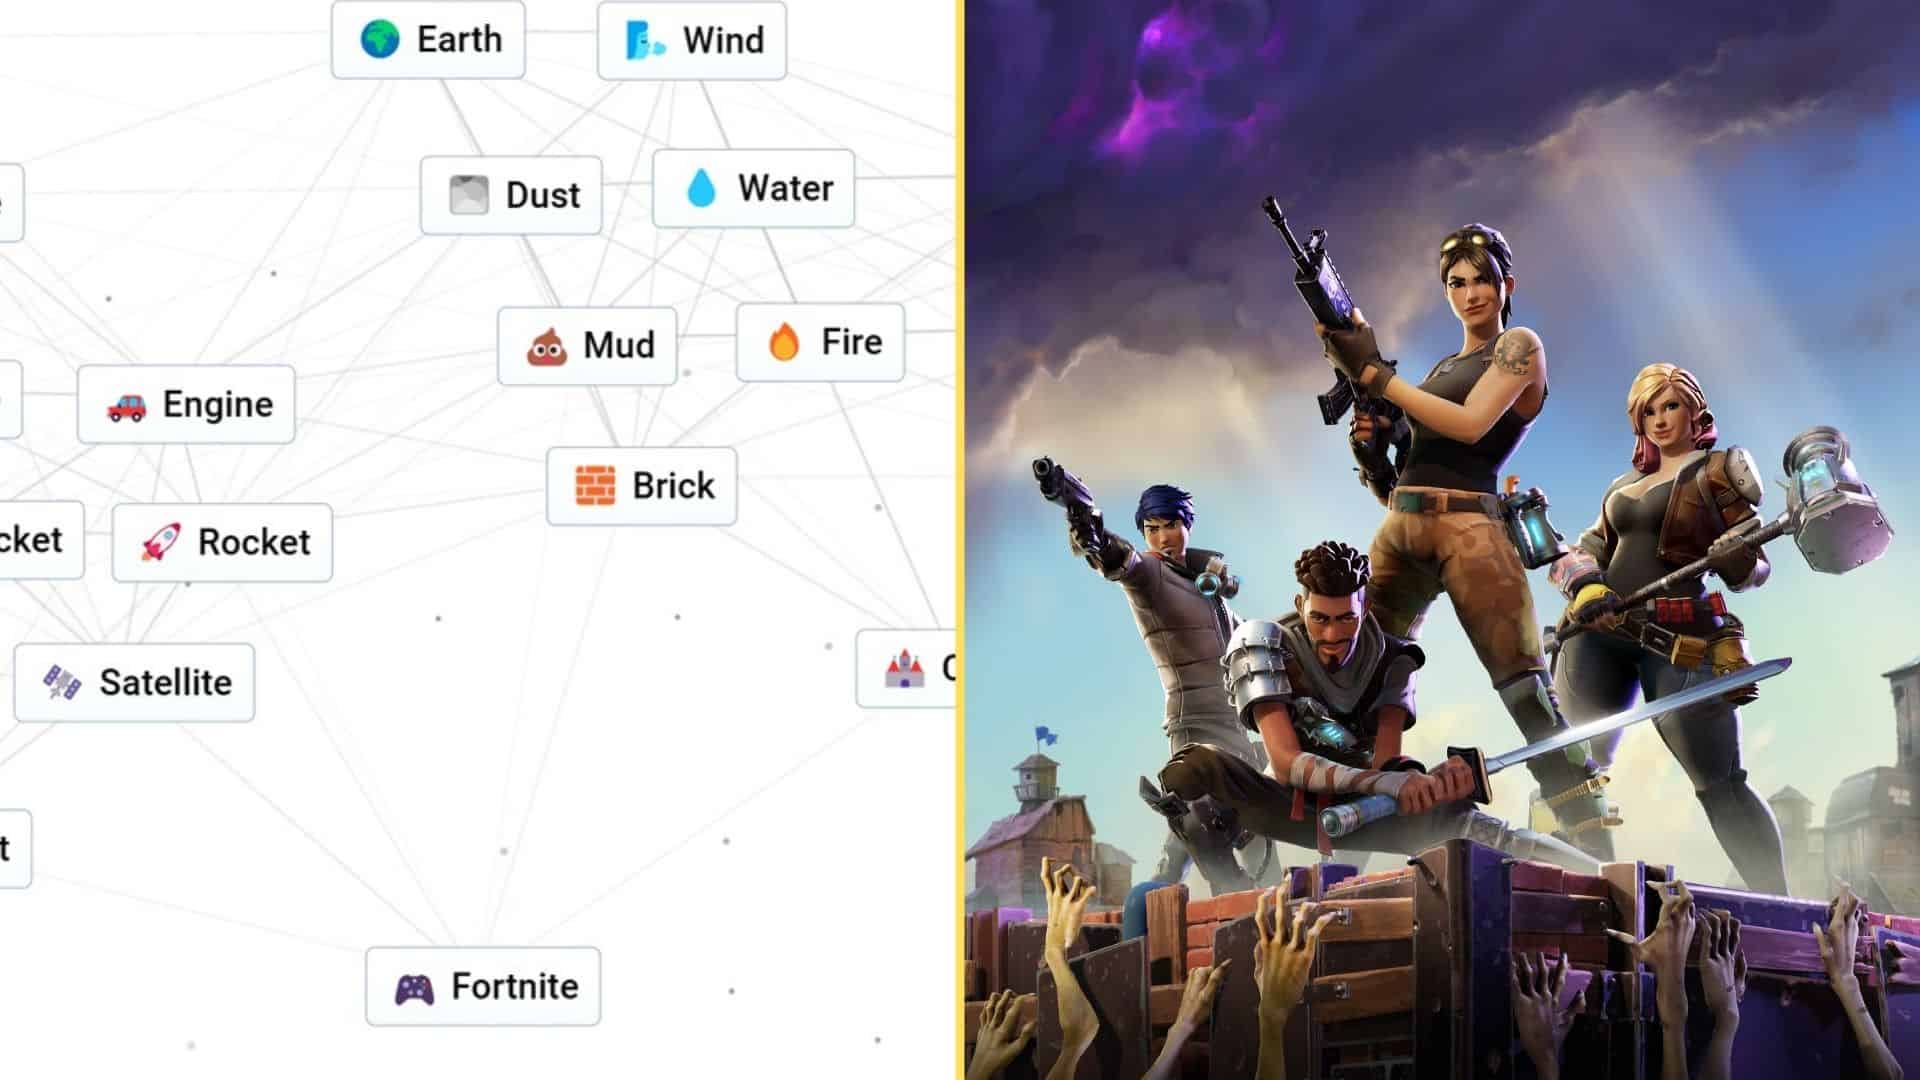 Infinite Craft Fortnite - An image of the item and its Infinite Craft combination.